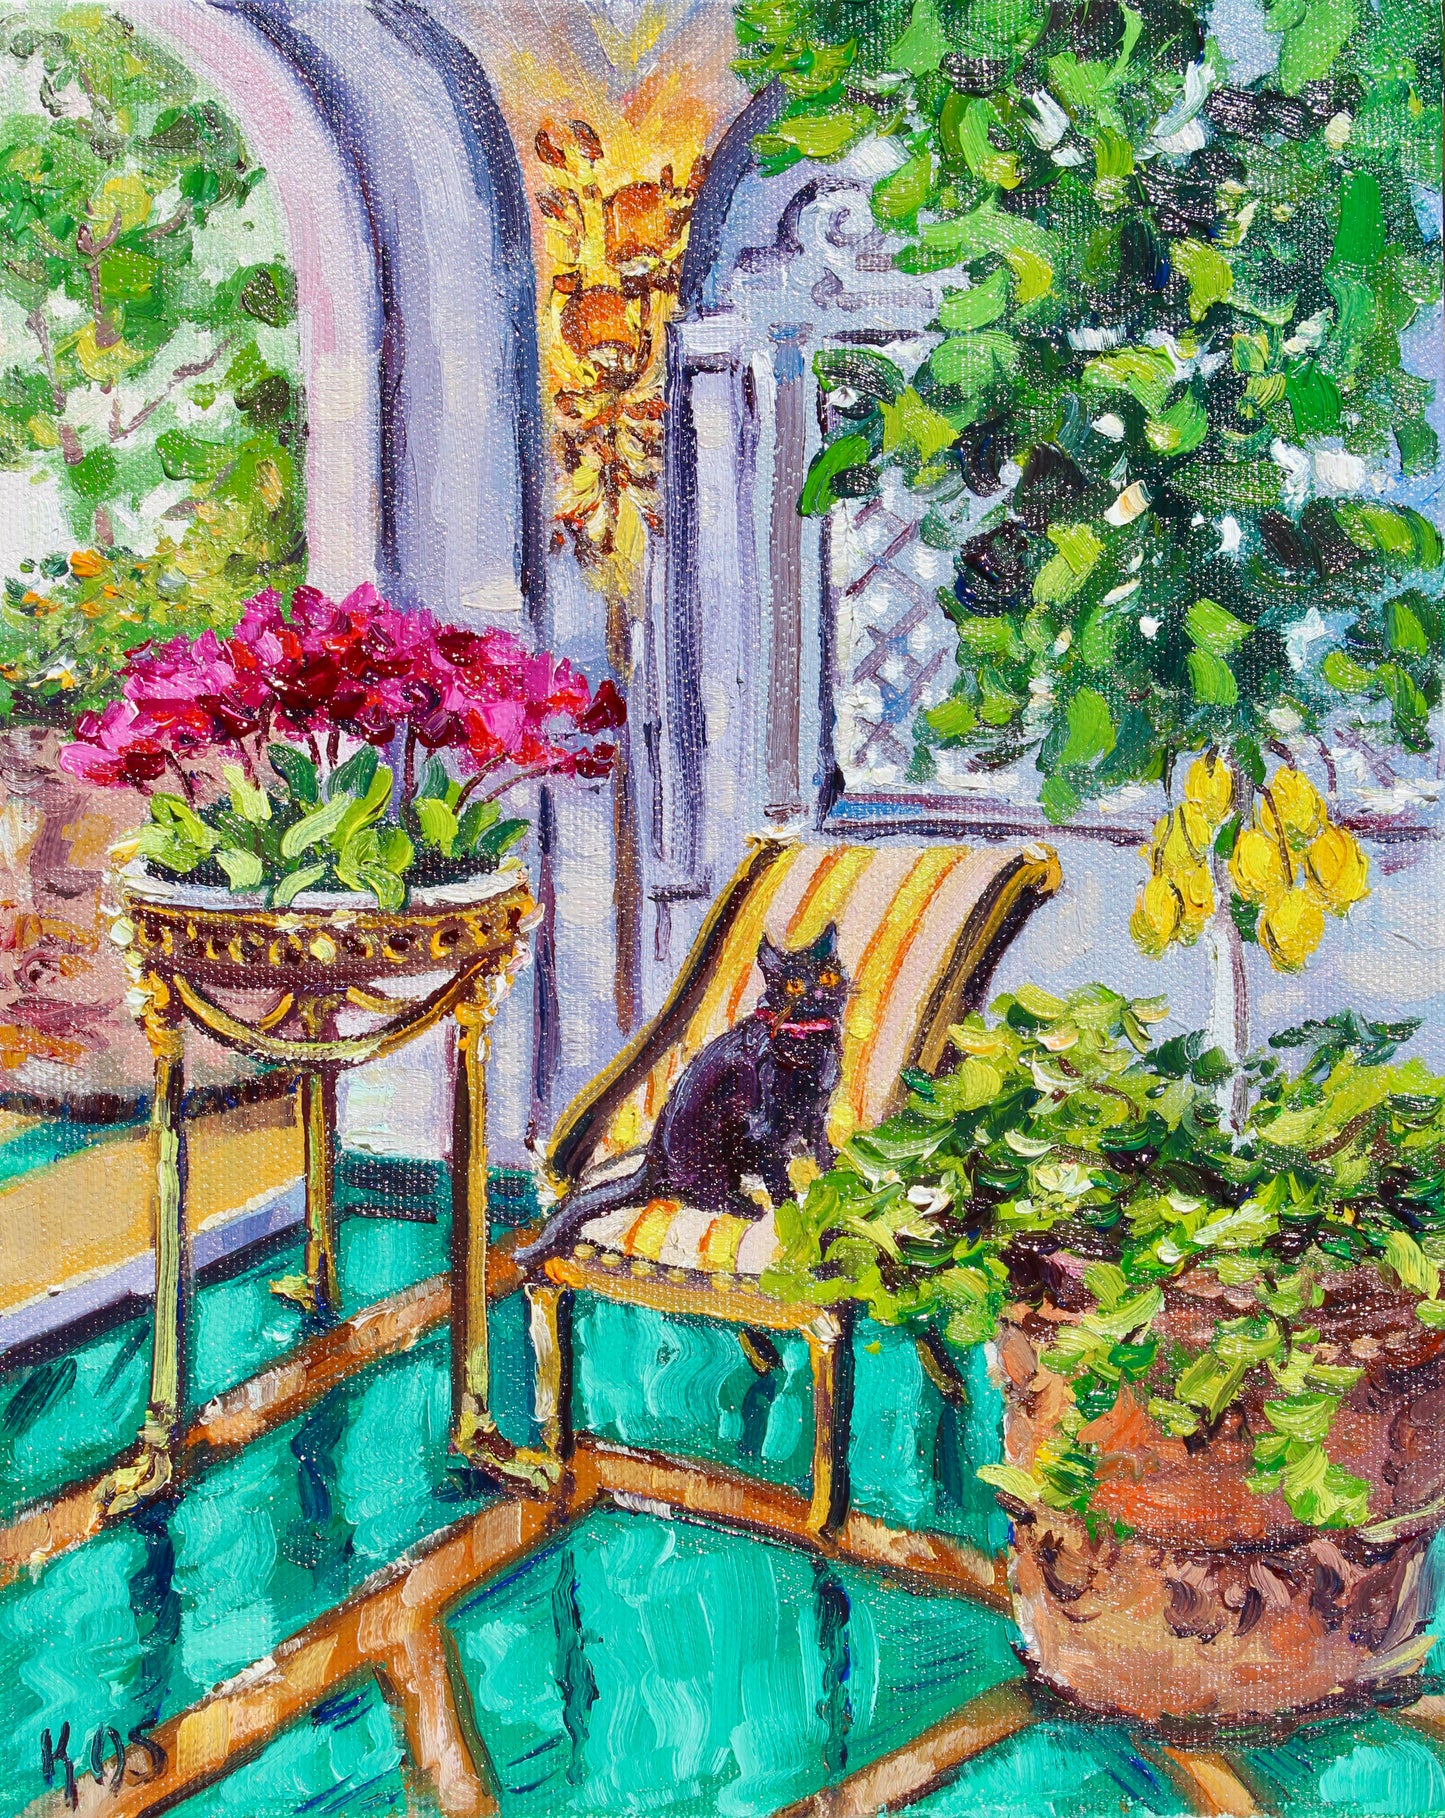 Villa di Roma, An Original Oil Painting On Canvas Of A Black Cat In A Garden Room